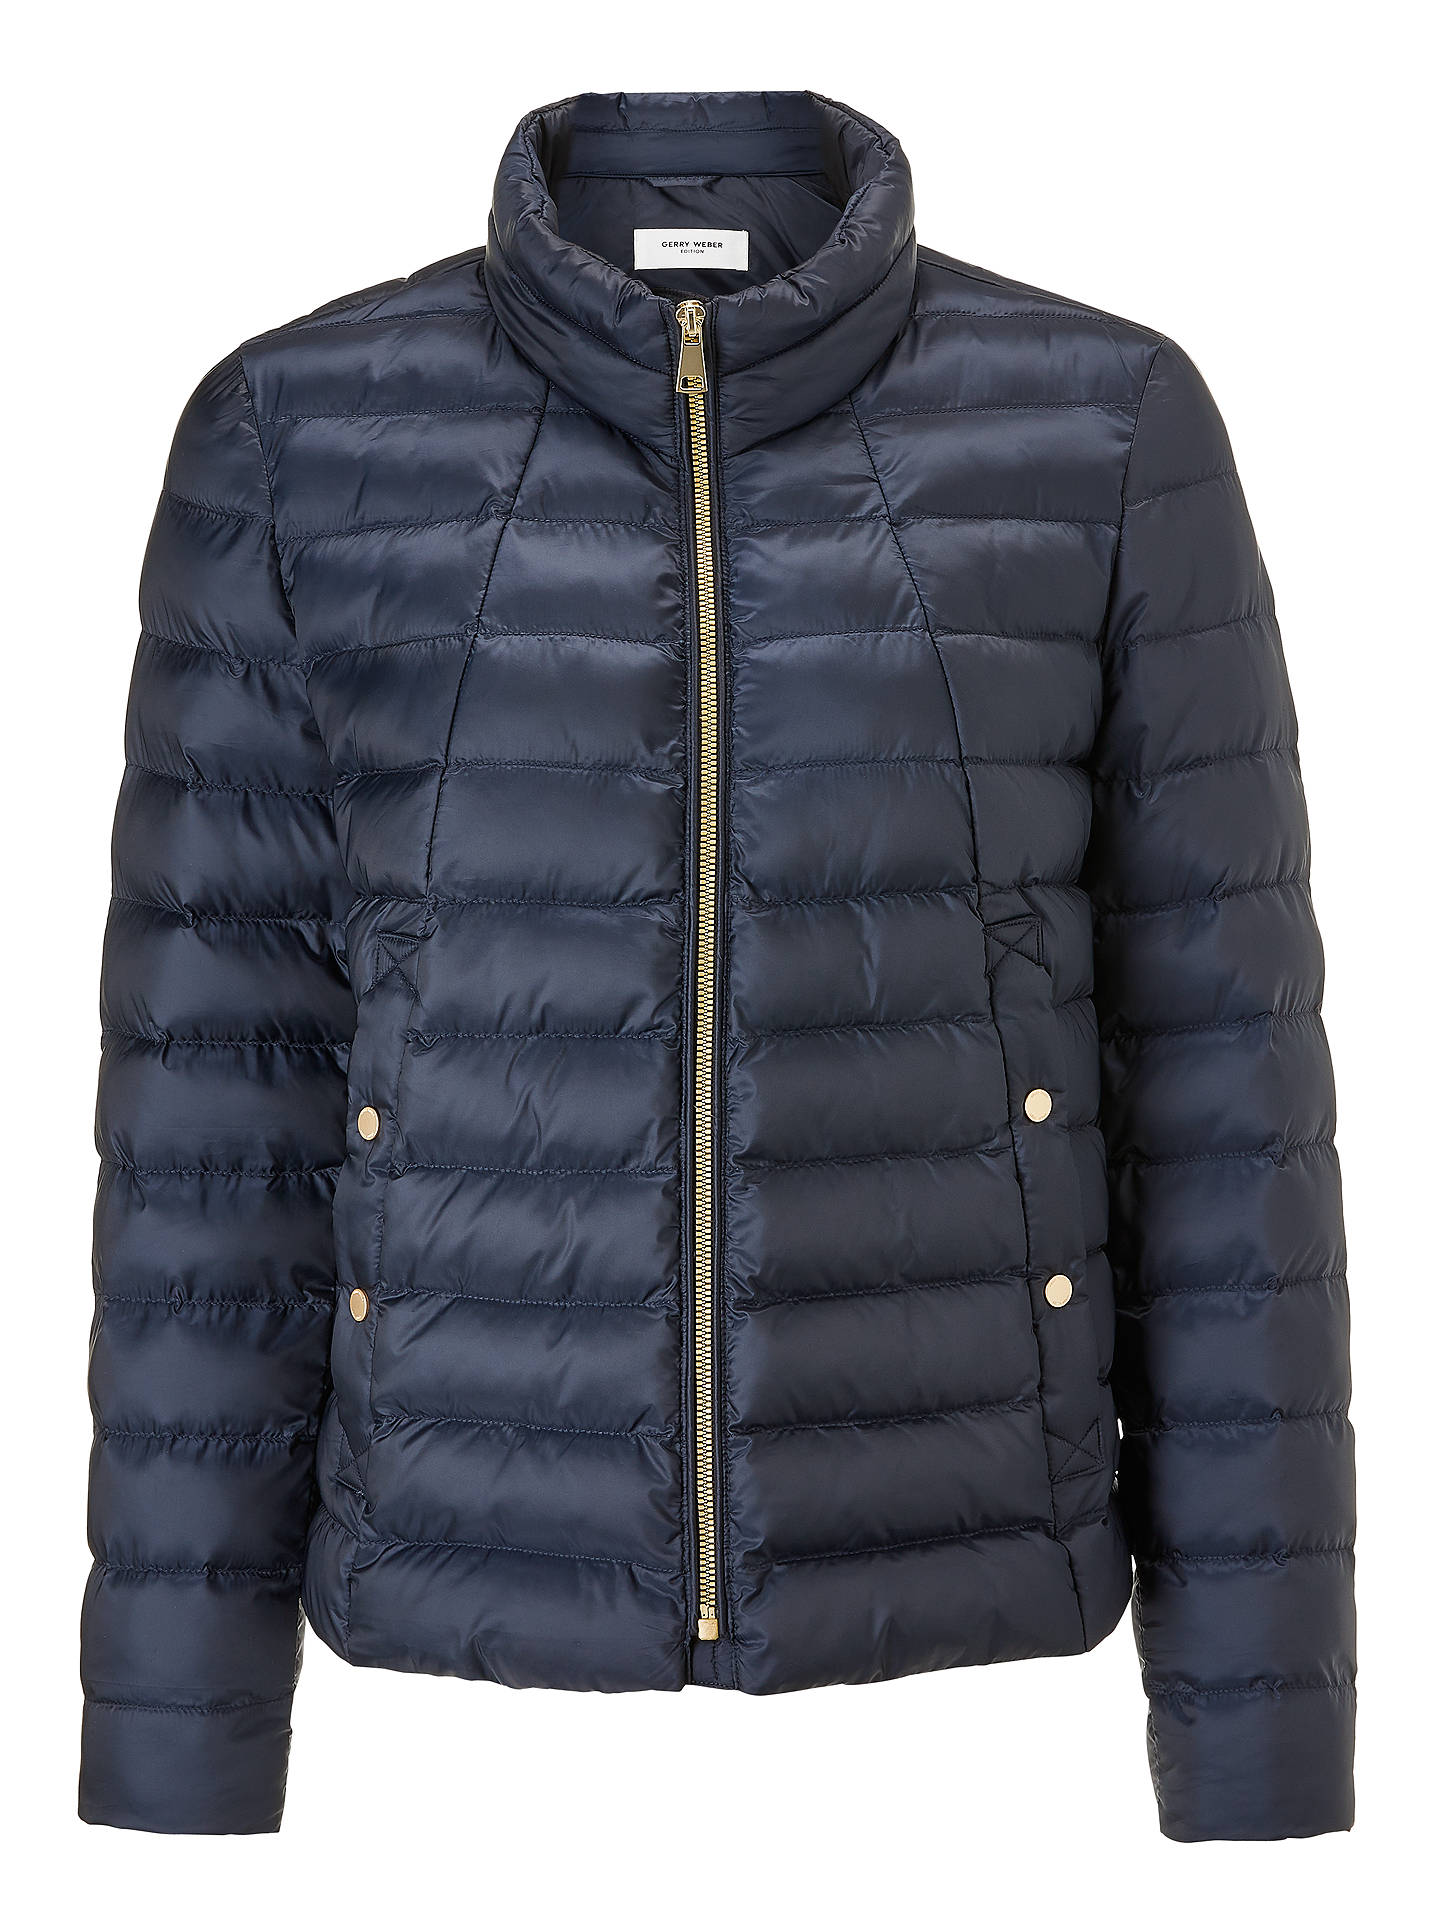 Gerry Weber Quilted Jacket, Navy at John Lewis & Partners